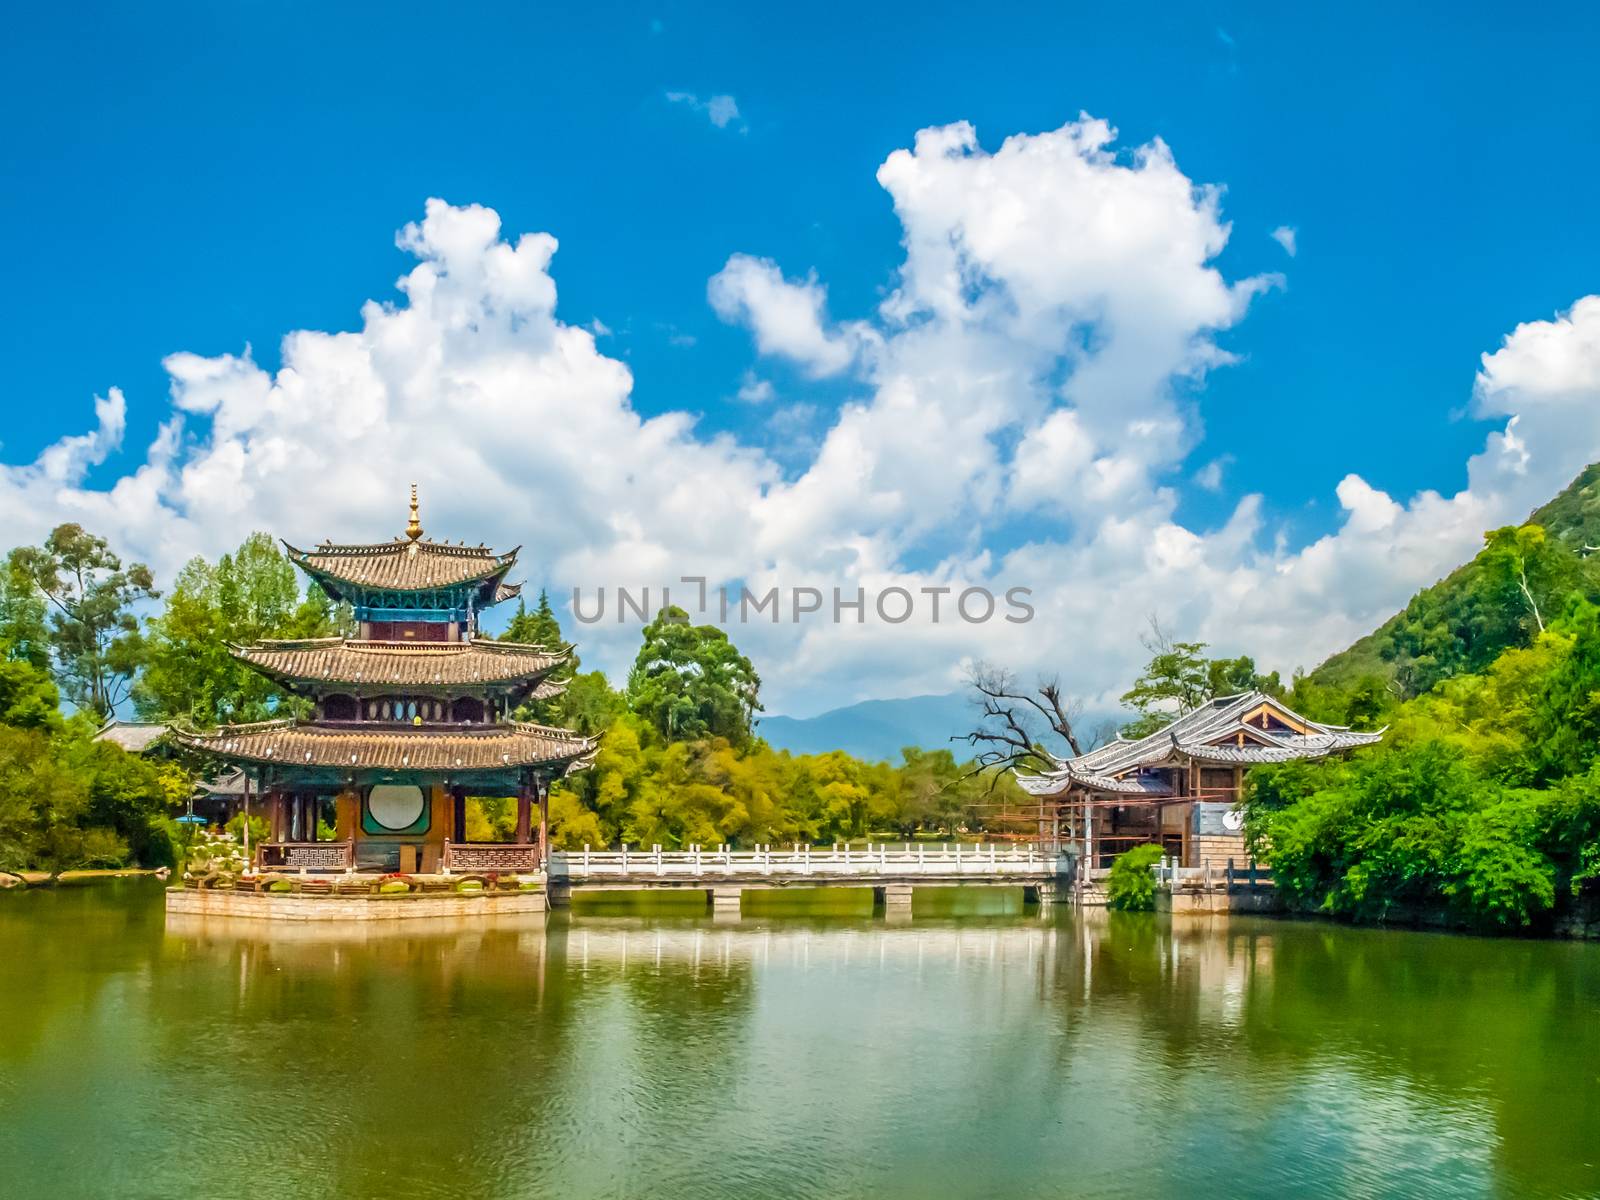 Black Dragon Pool and Moon Embracing Pavilion on sunny day, Lijiang, Yunnan Province, China by pyty